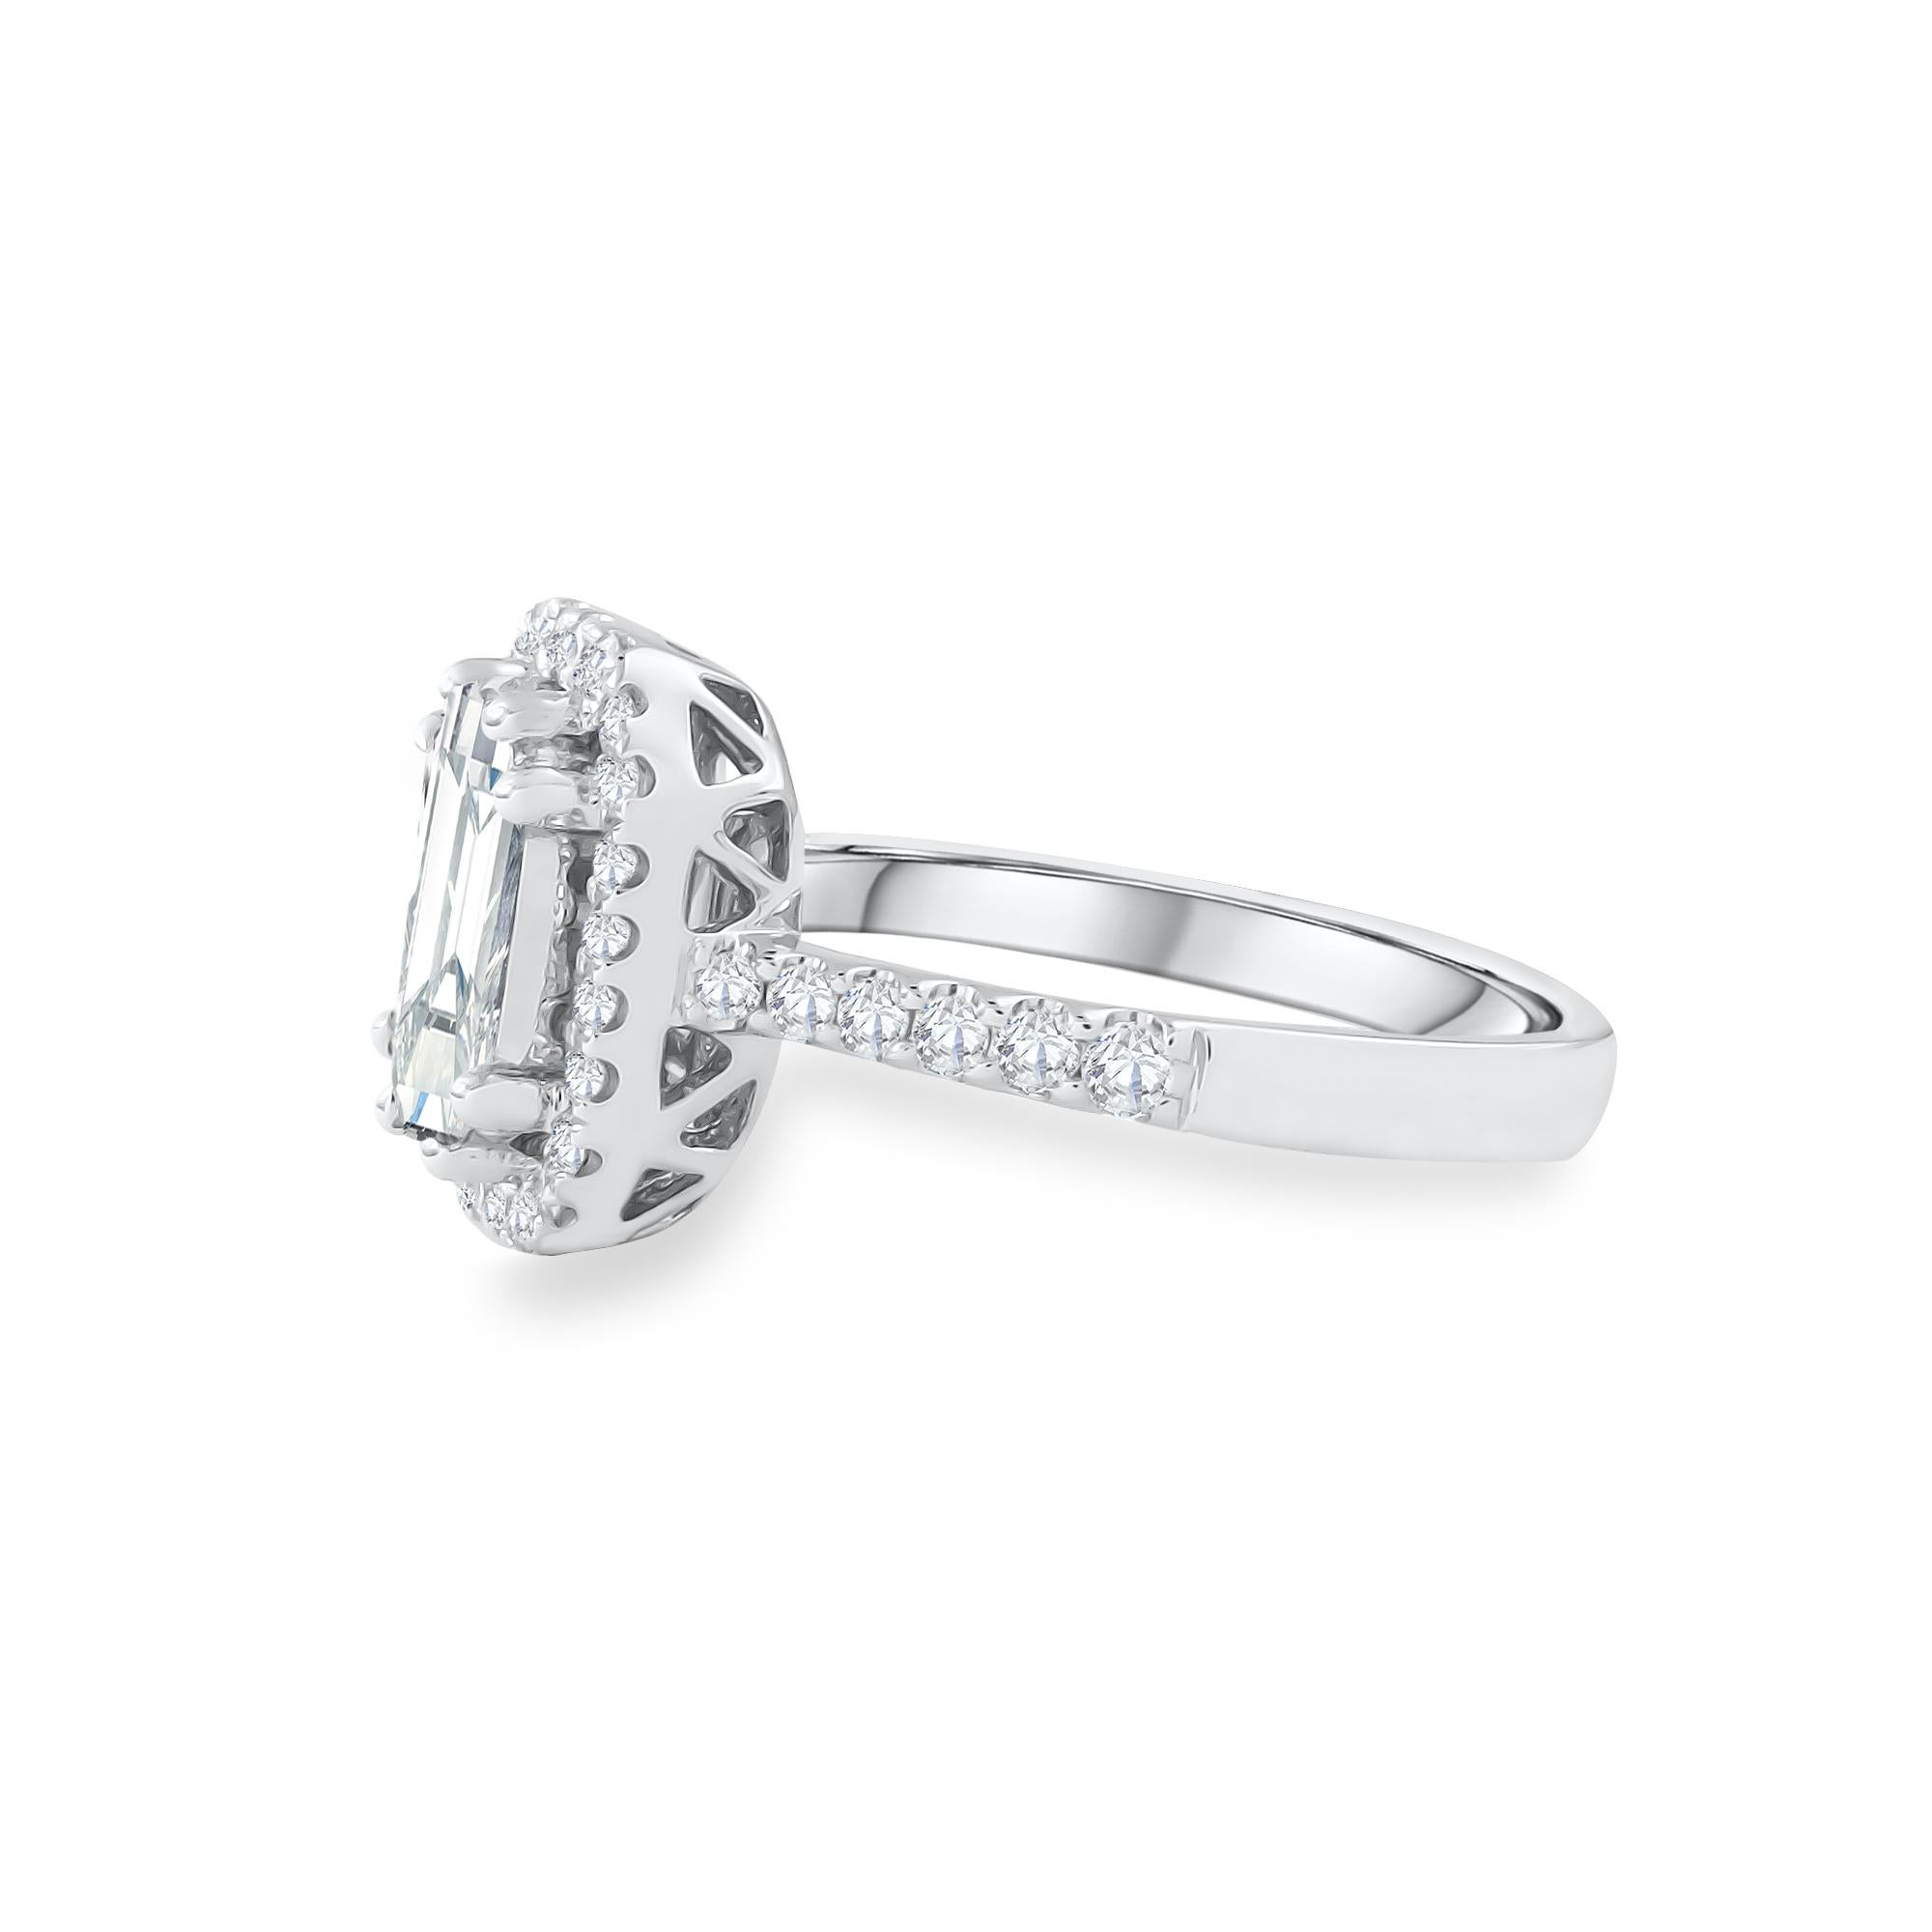 This diamond ring has an Emerald shape Illusion (Pie Cut) to create the look of a 2 carat single Emerald-cut stone surrounded beautifully with brilliant round diamonds, Handcrafted in 18 kt white gold. This Ring will add a touch of sophistication to